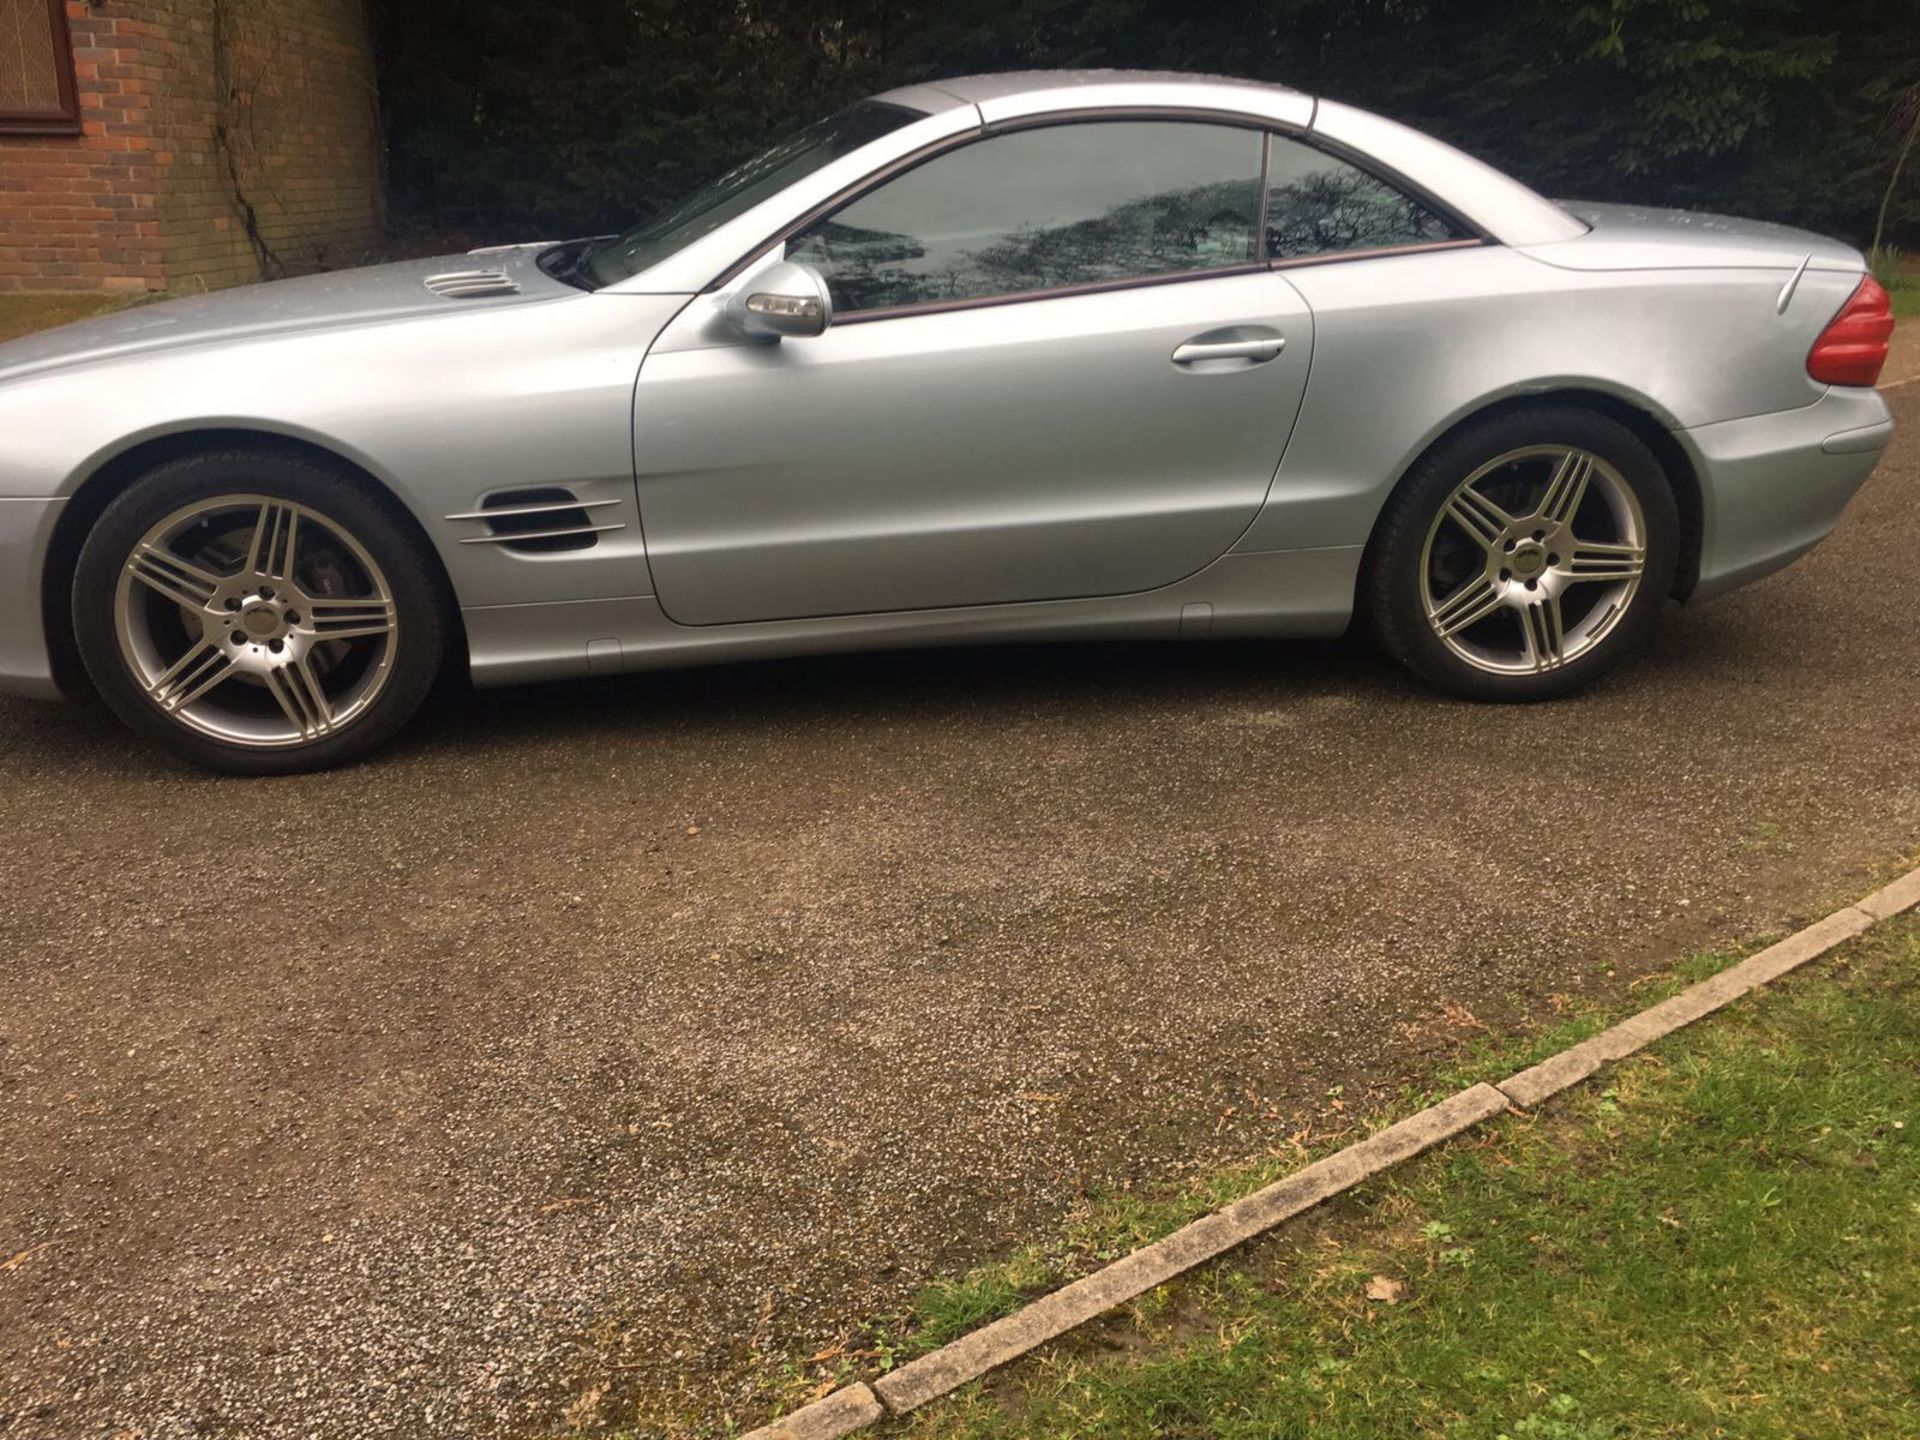 Mercedes SL500 Convertible 2003 - Image 2 of 7